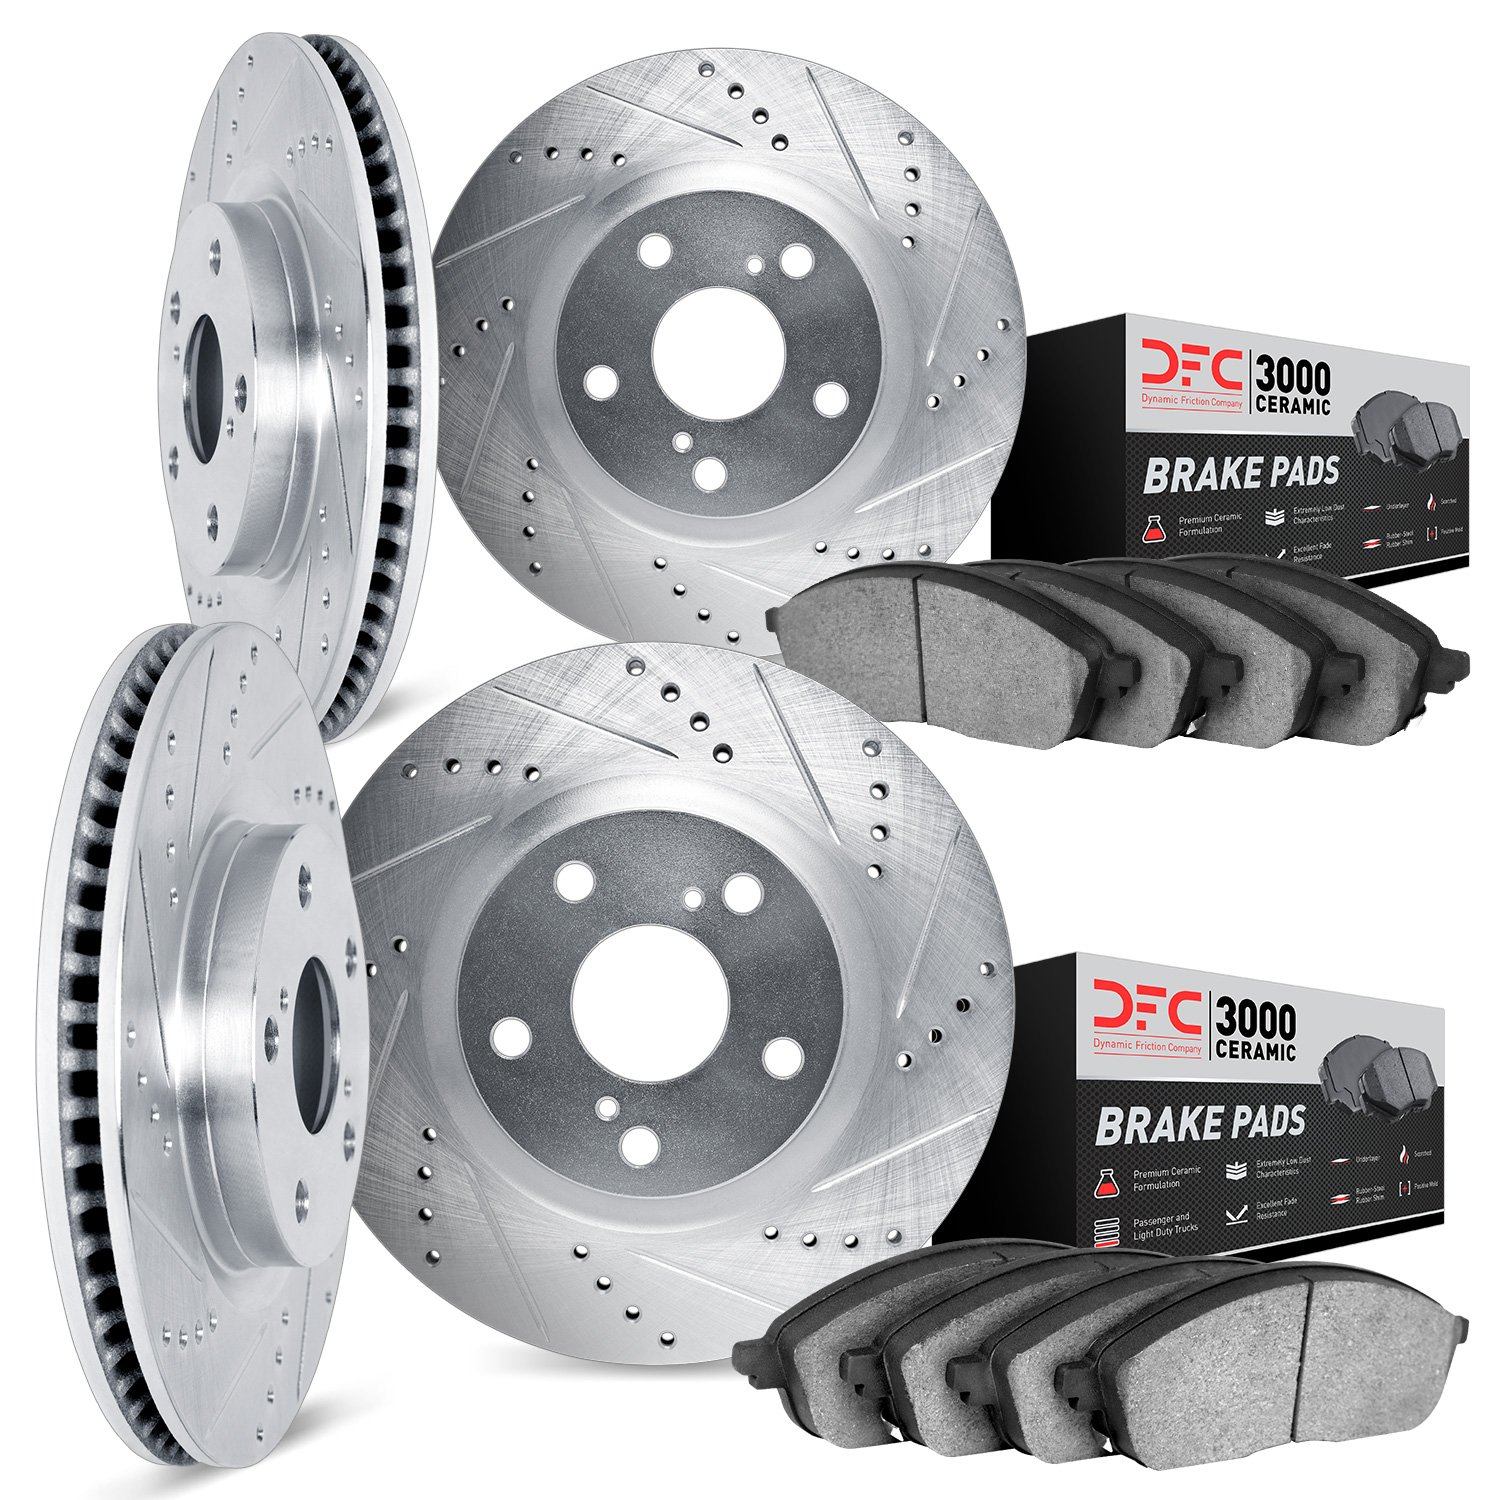 7304-67050 Drilled/Slotted Brake Rotor with 3000-Series Ceramic Brake Pads Kit [Silver], 2002-2006 Infiniti/Nissan, Position: Fr